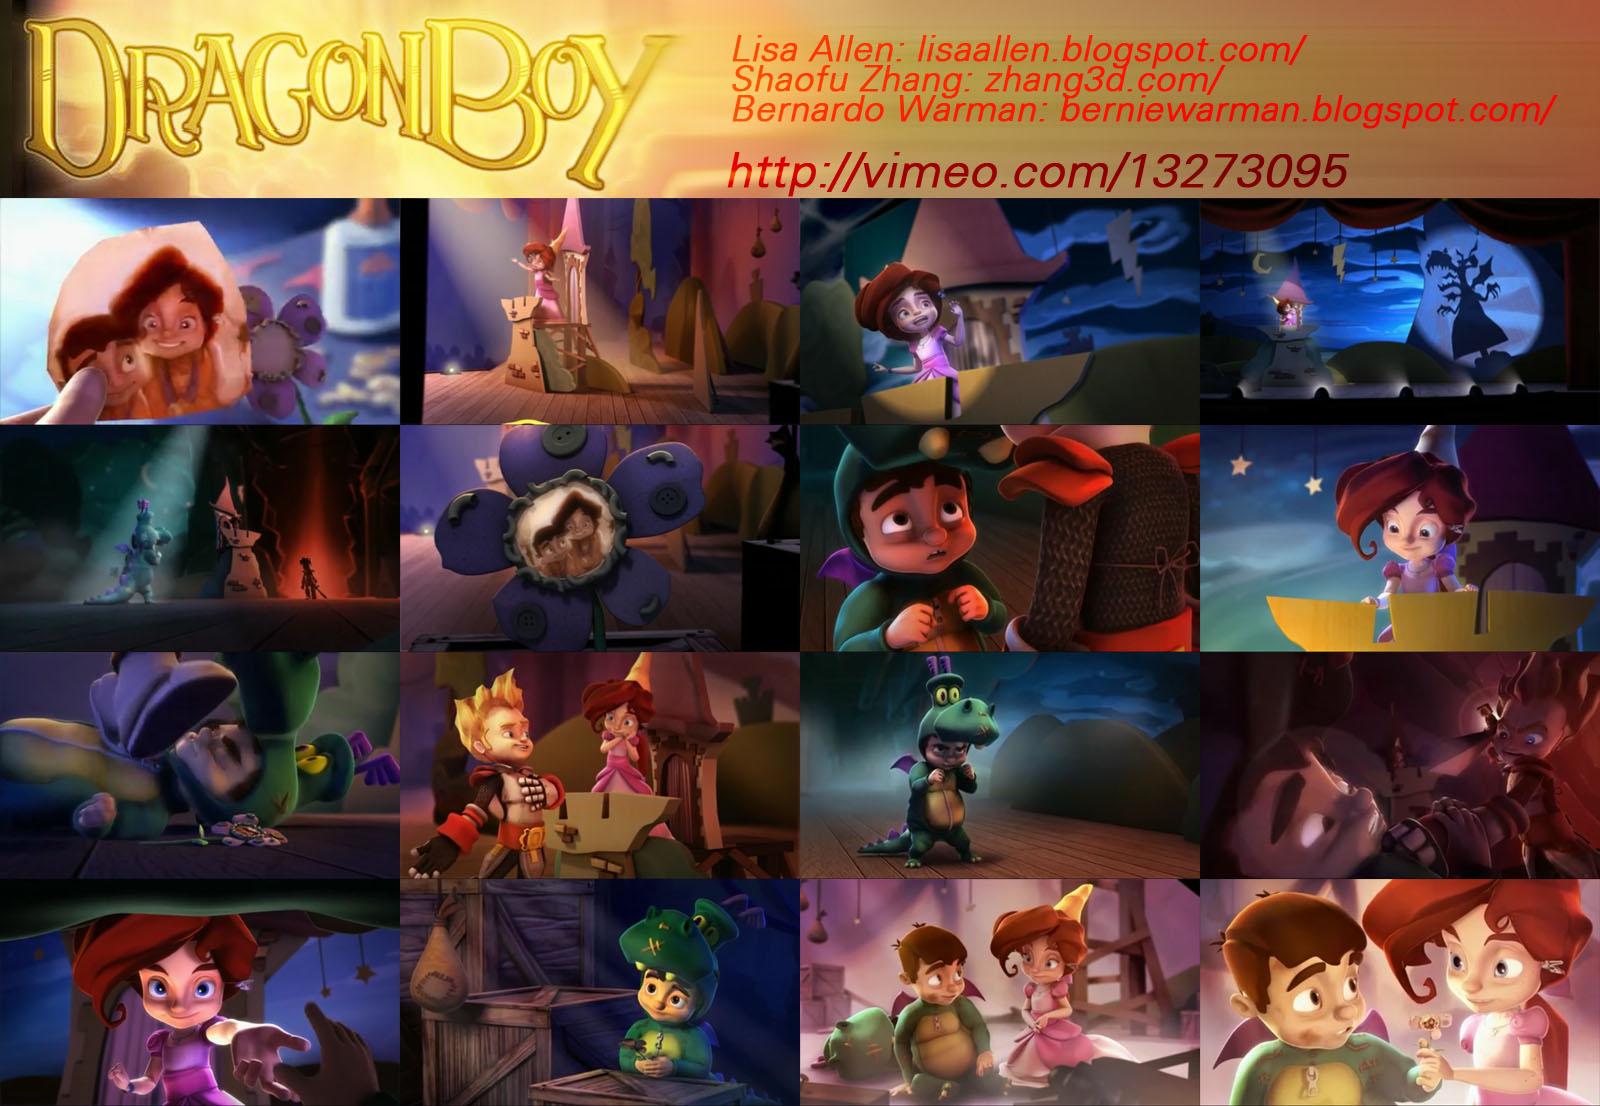 Animation Tutorials Collection: Dragonboy-the Academy of Art University